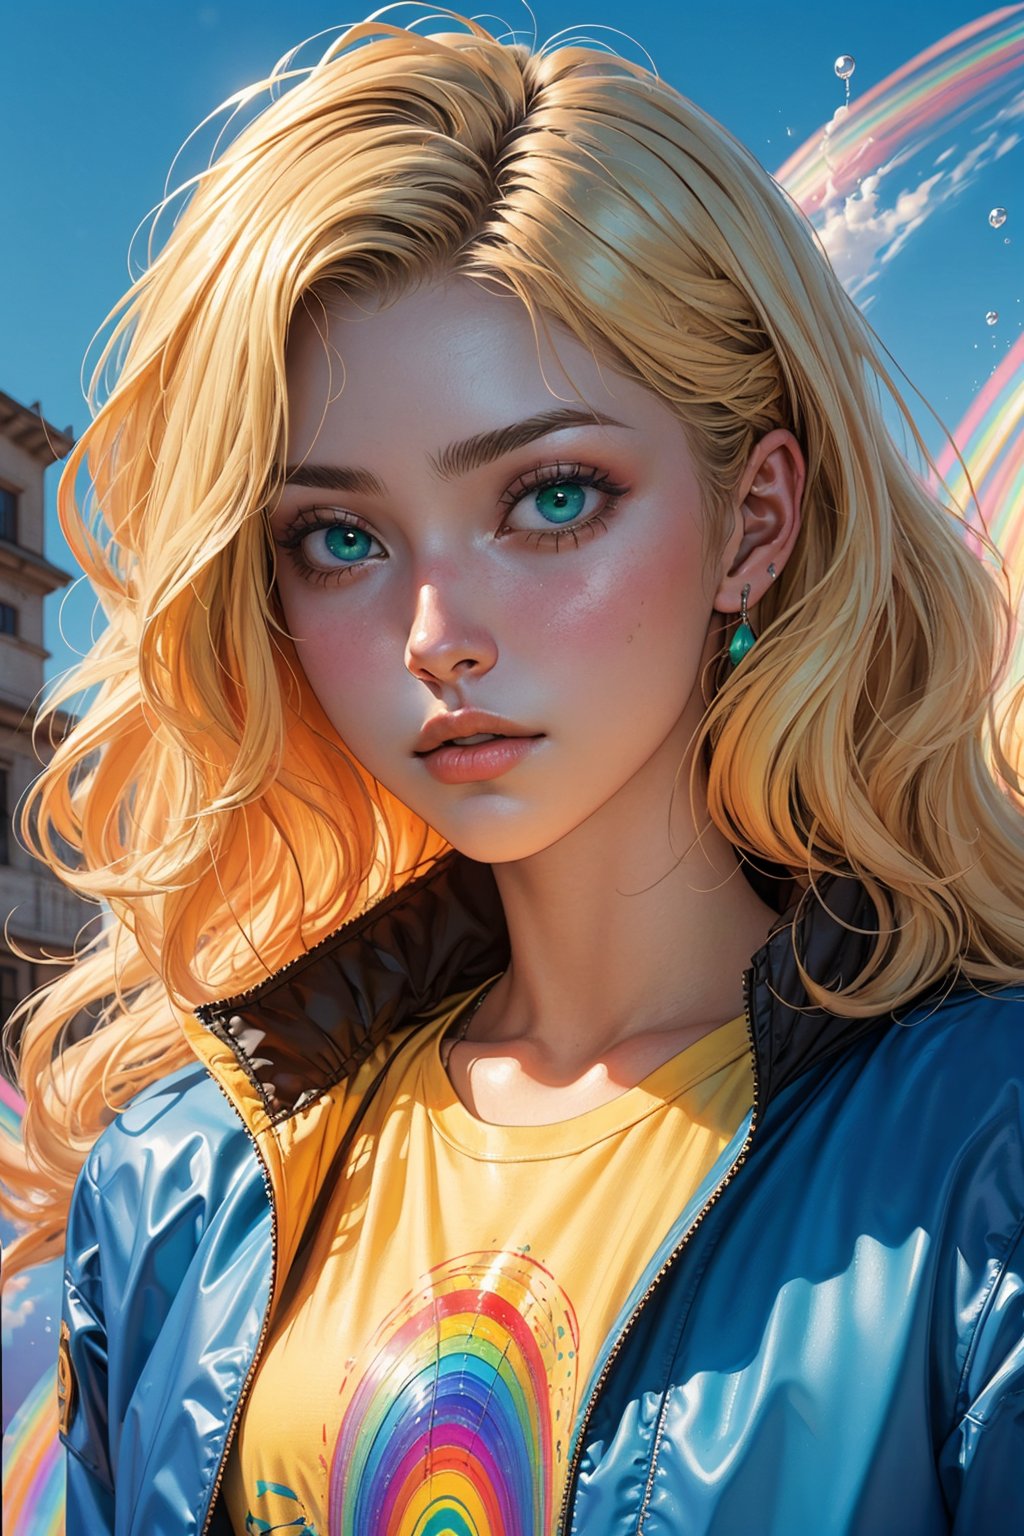 1girl, solo, a beautiful woman, 19 years old, oil painting, impasto, looking at viewer, long wavy blonde rainbow hair, blue_green eyes, tomboy aesthetic, blue jacket, yellow t-shirt, urban psychedelic outfit, psychedelic  background, masterpiece, ,sciamano240, soft shading, soft shading, Vee